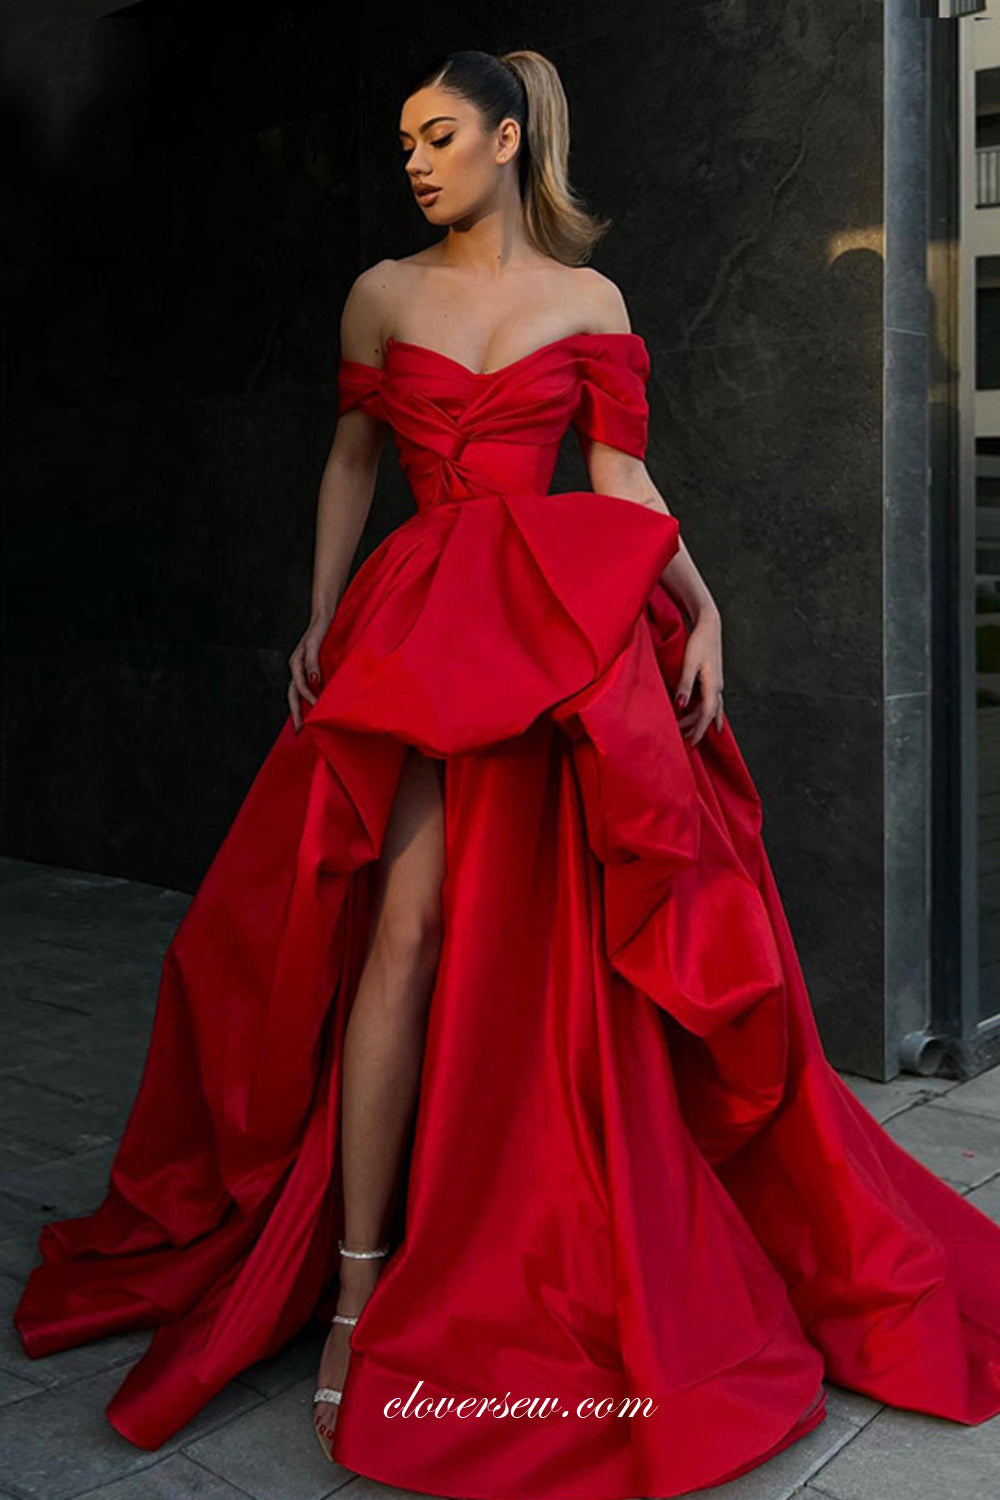 Red Satin Off The Shoulder Bubble A-line Prom Dresses CP0943, CP0943